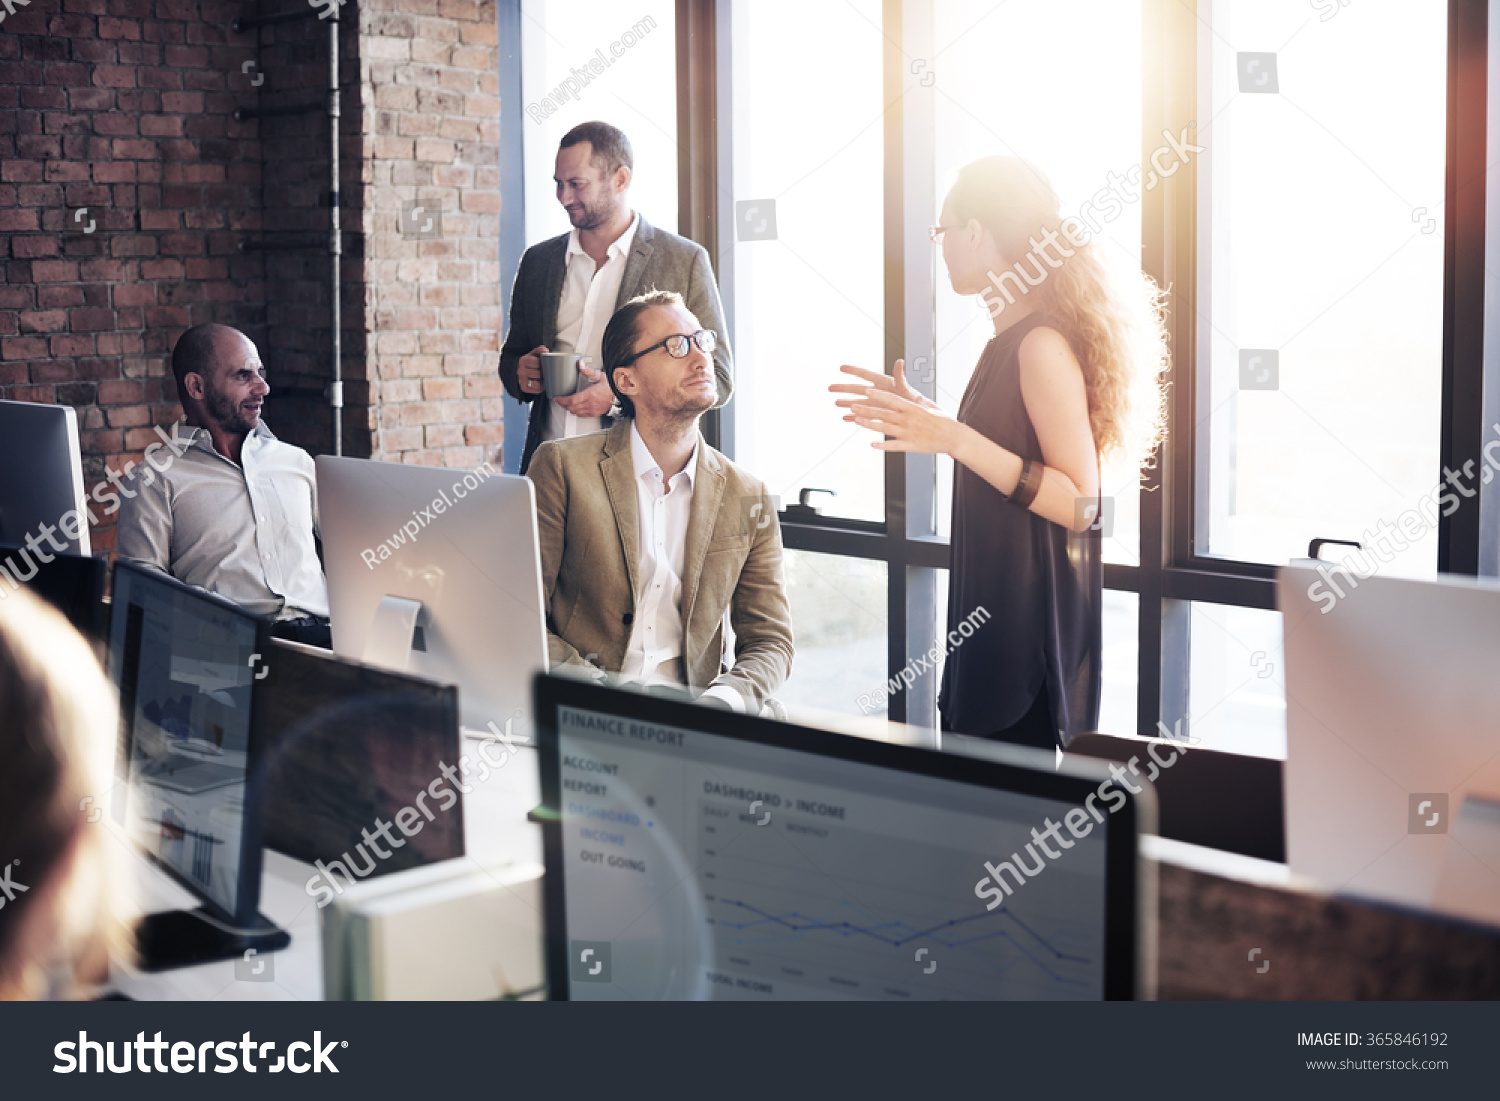 Business Communication Connection Working Concept Stock Photo 365846192 ...